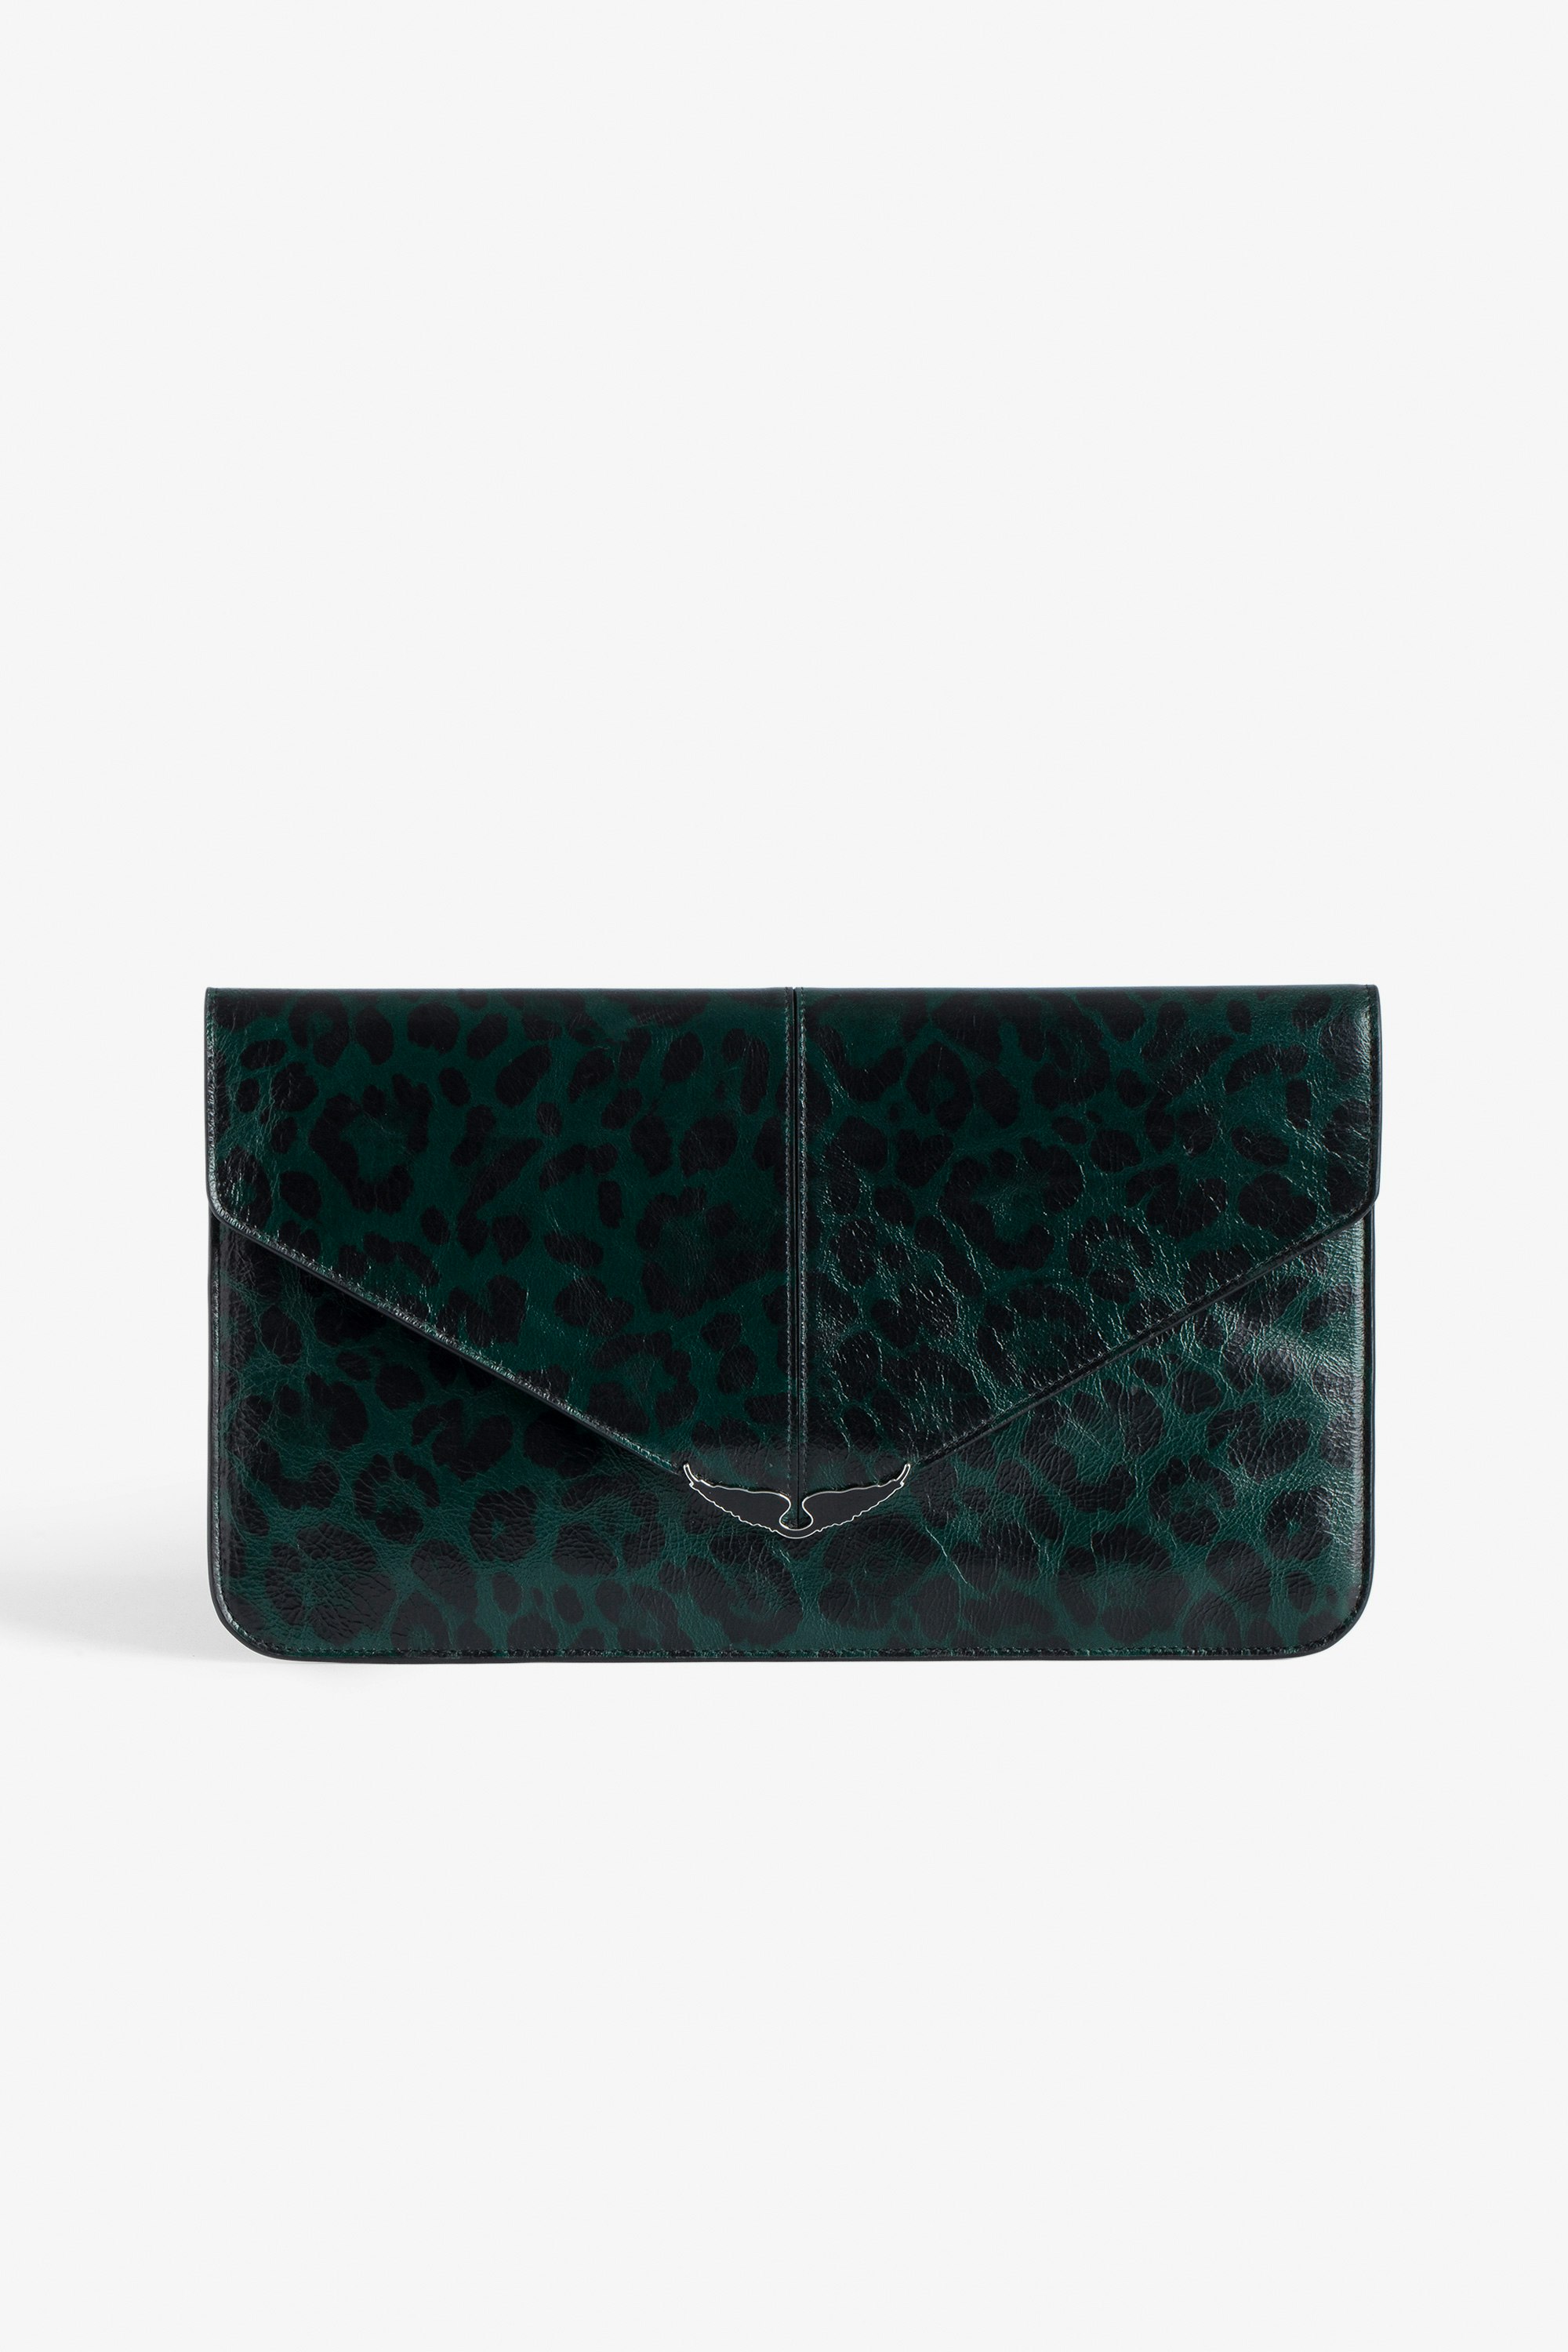 Borderline Leopard Pouch - Women’s green leopard-print patent leather envelope clutch with wings charm.